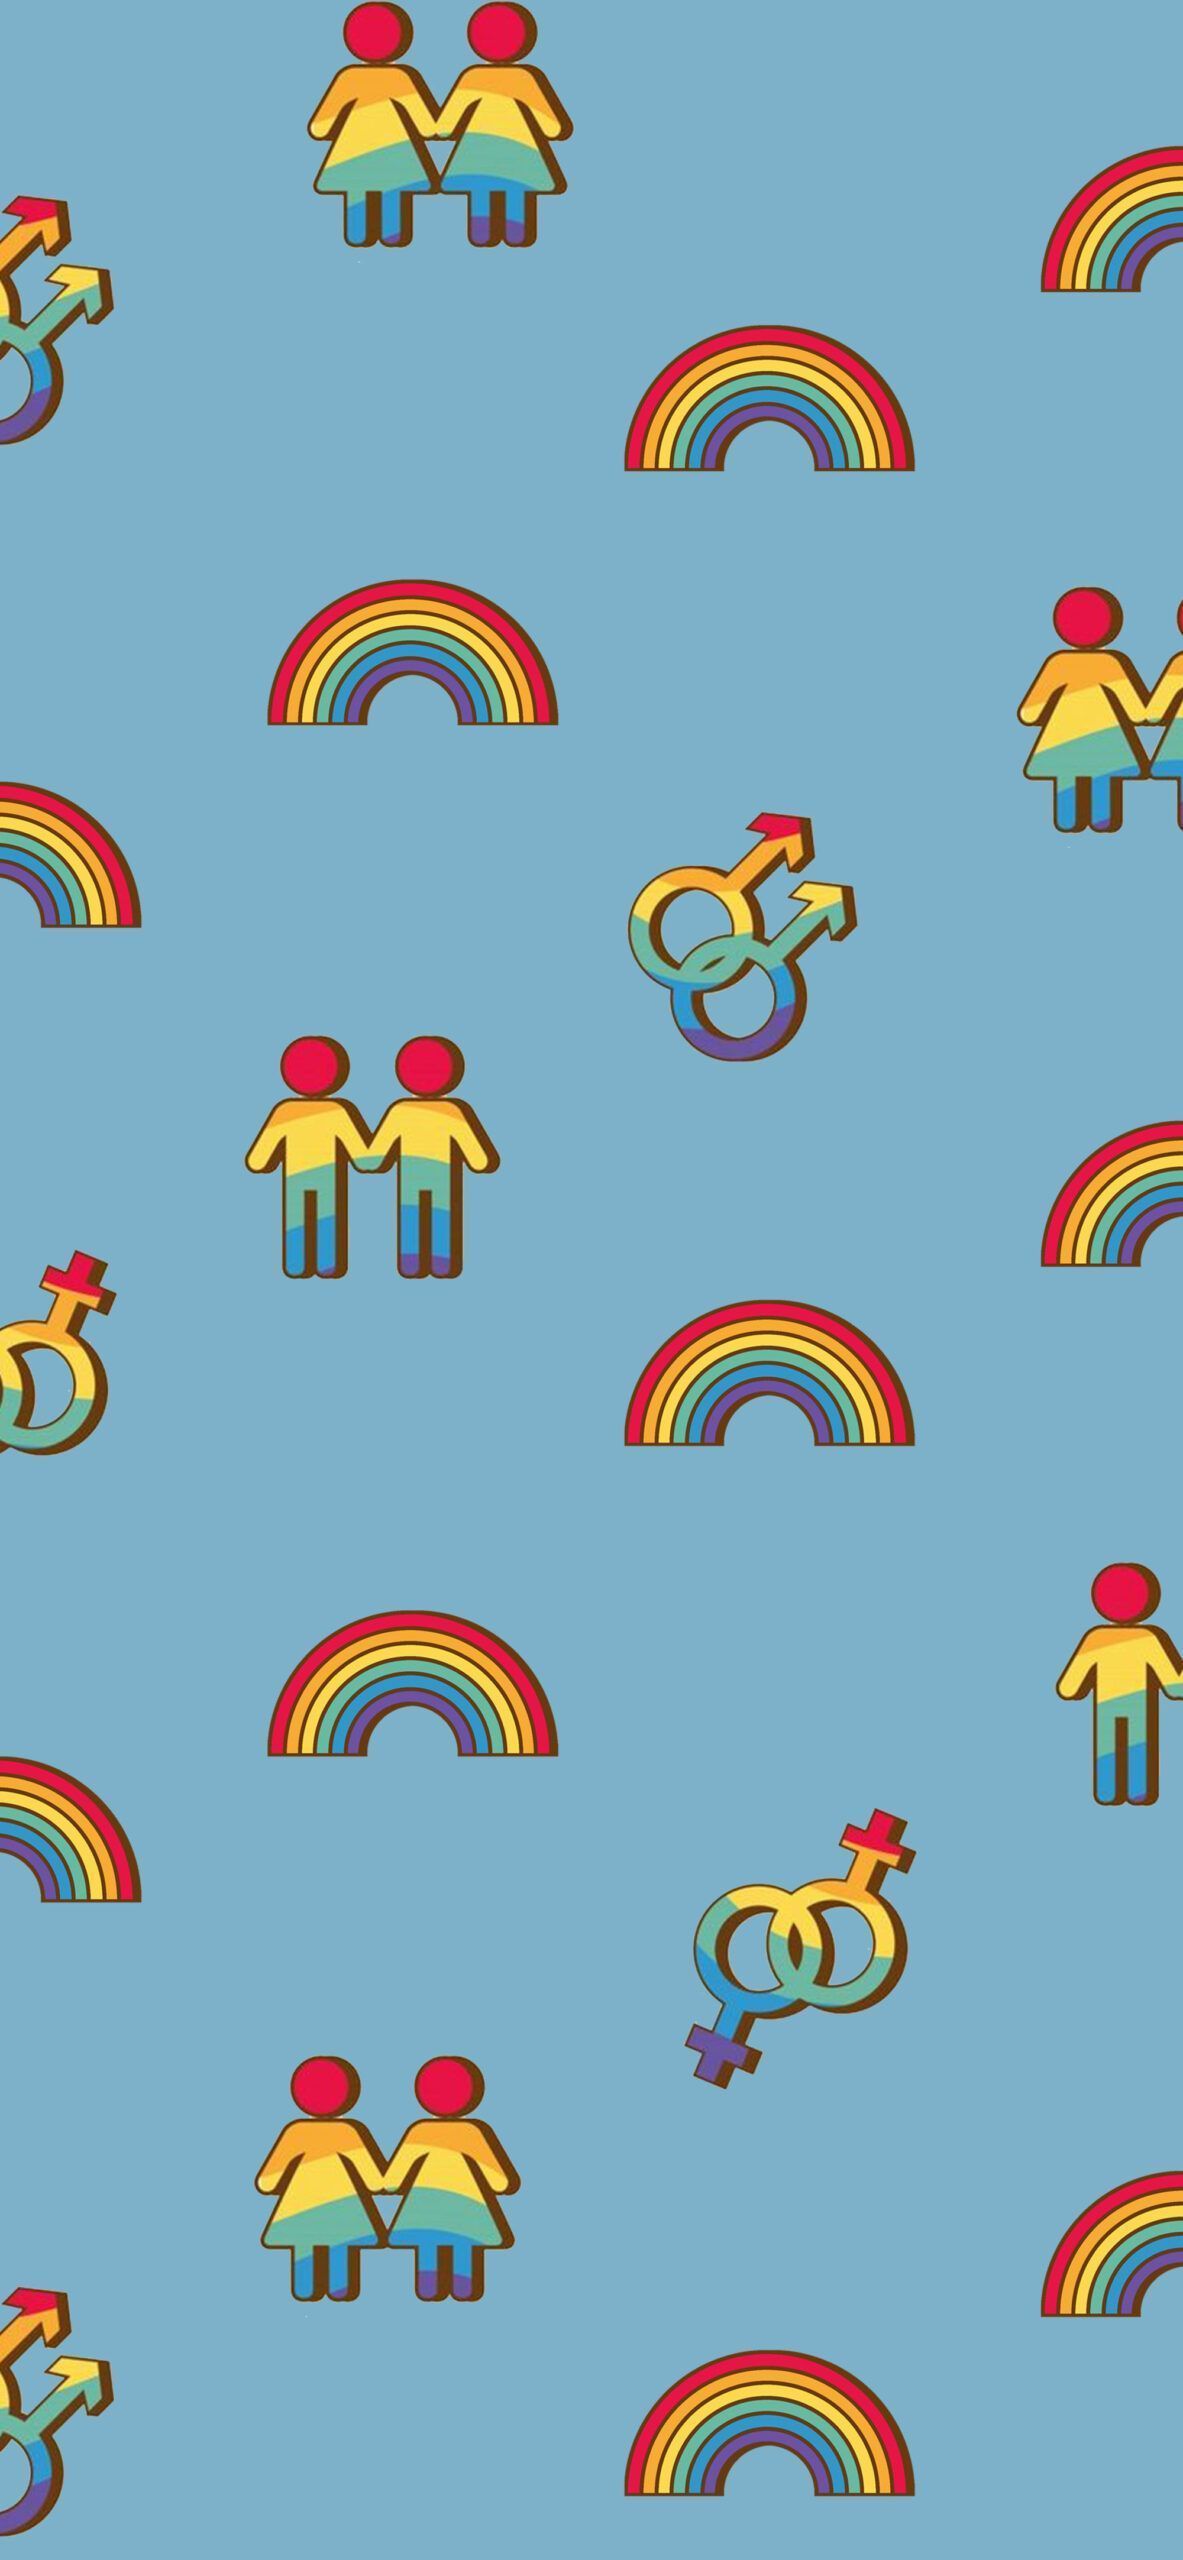 A blue background with rainbows, gender symbols and same-sex couples. - Pride, LGBT